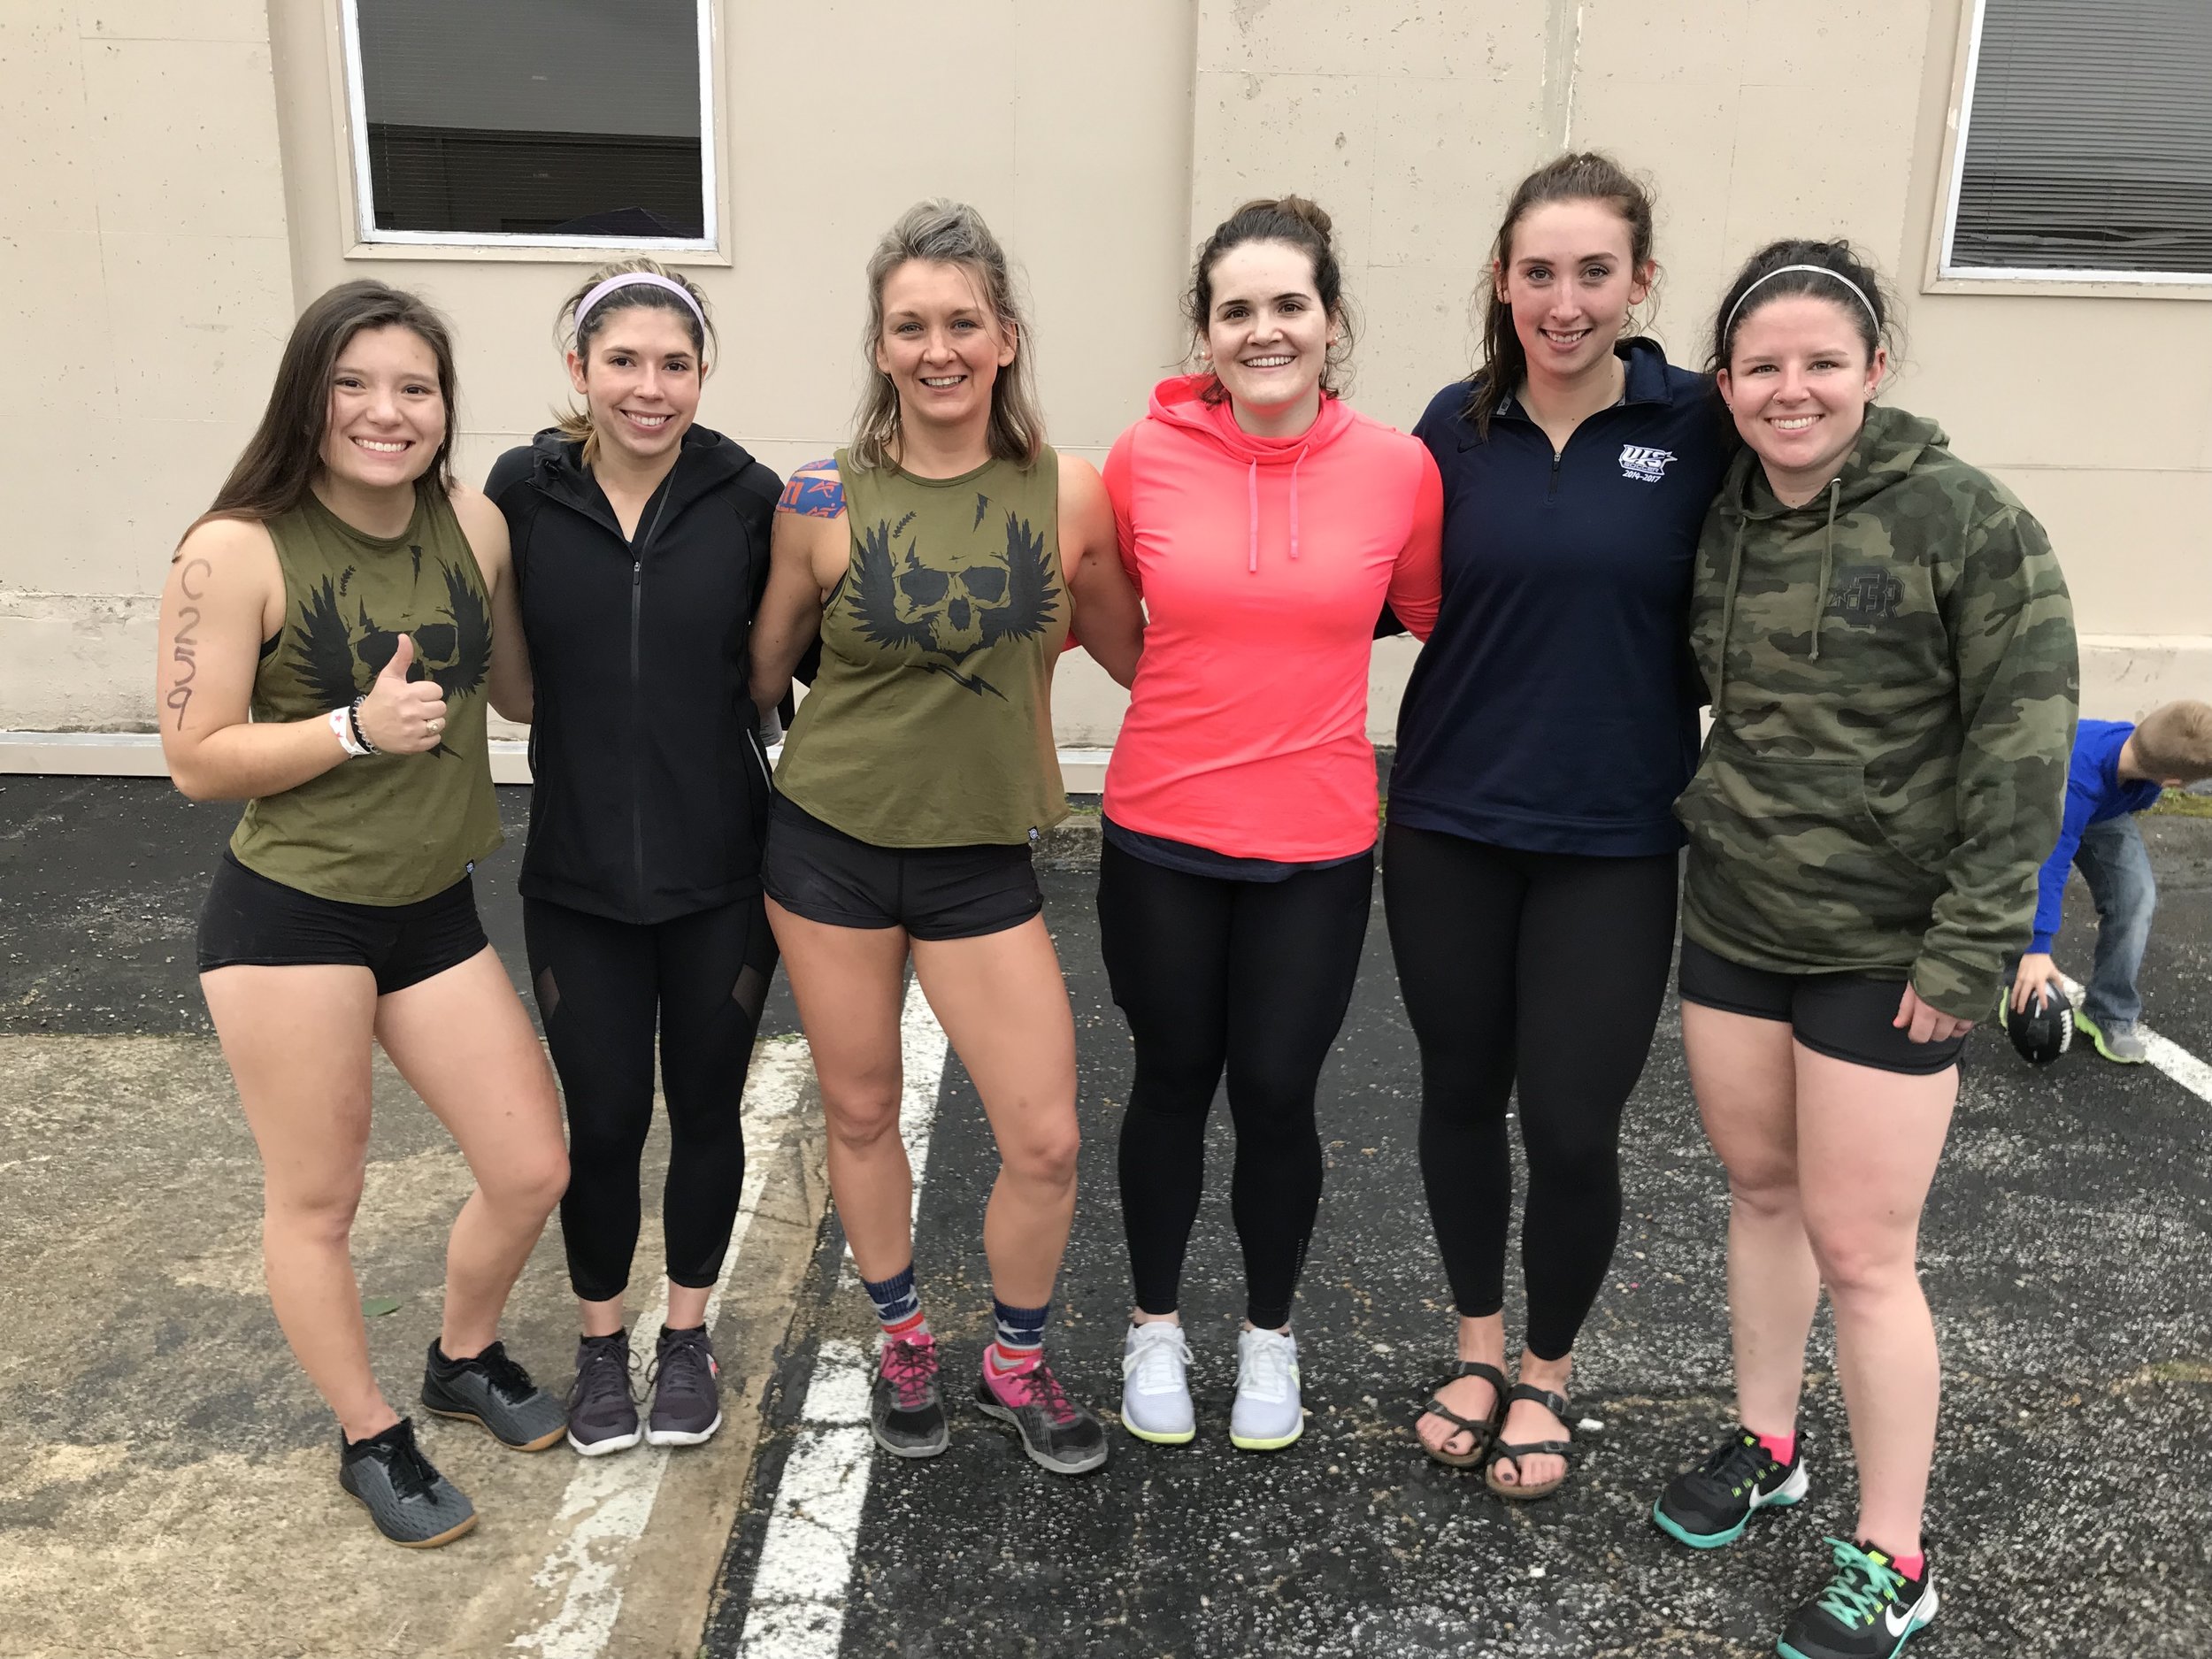 Taylor, Katie, Michelle, Elisa, Sam and Layken at the women’s only CrossFit comp: A League of Their Own!!